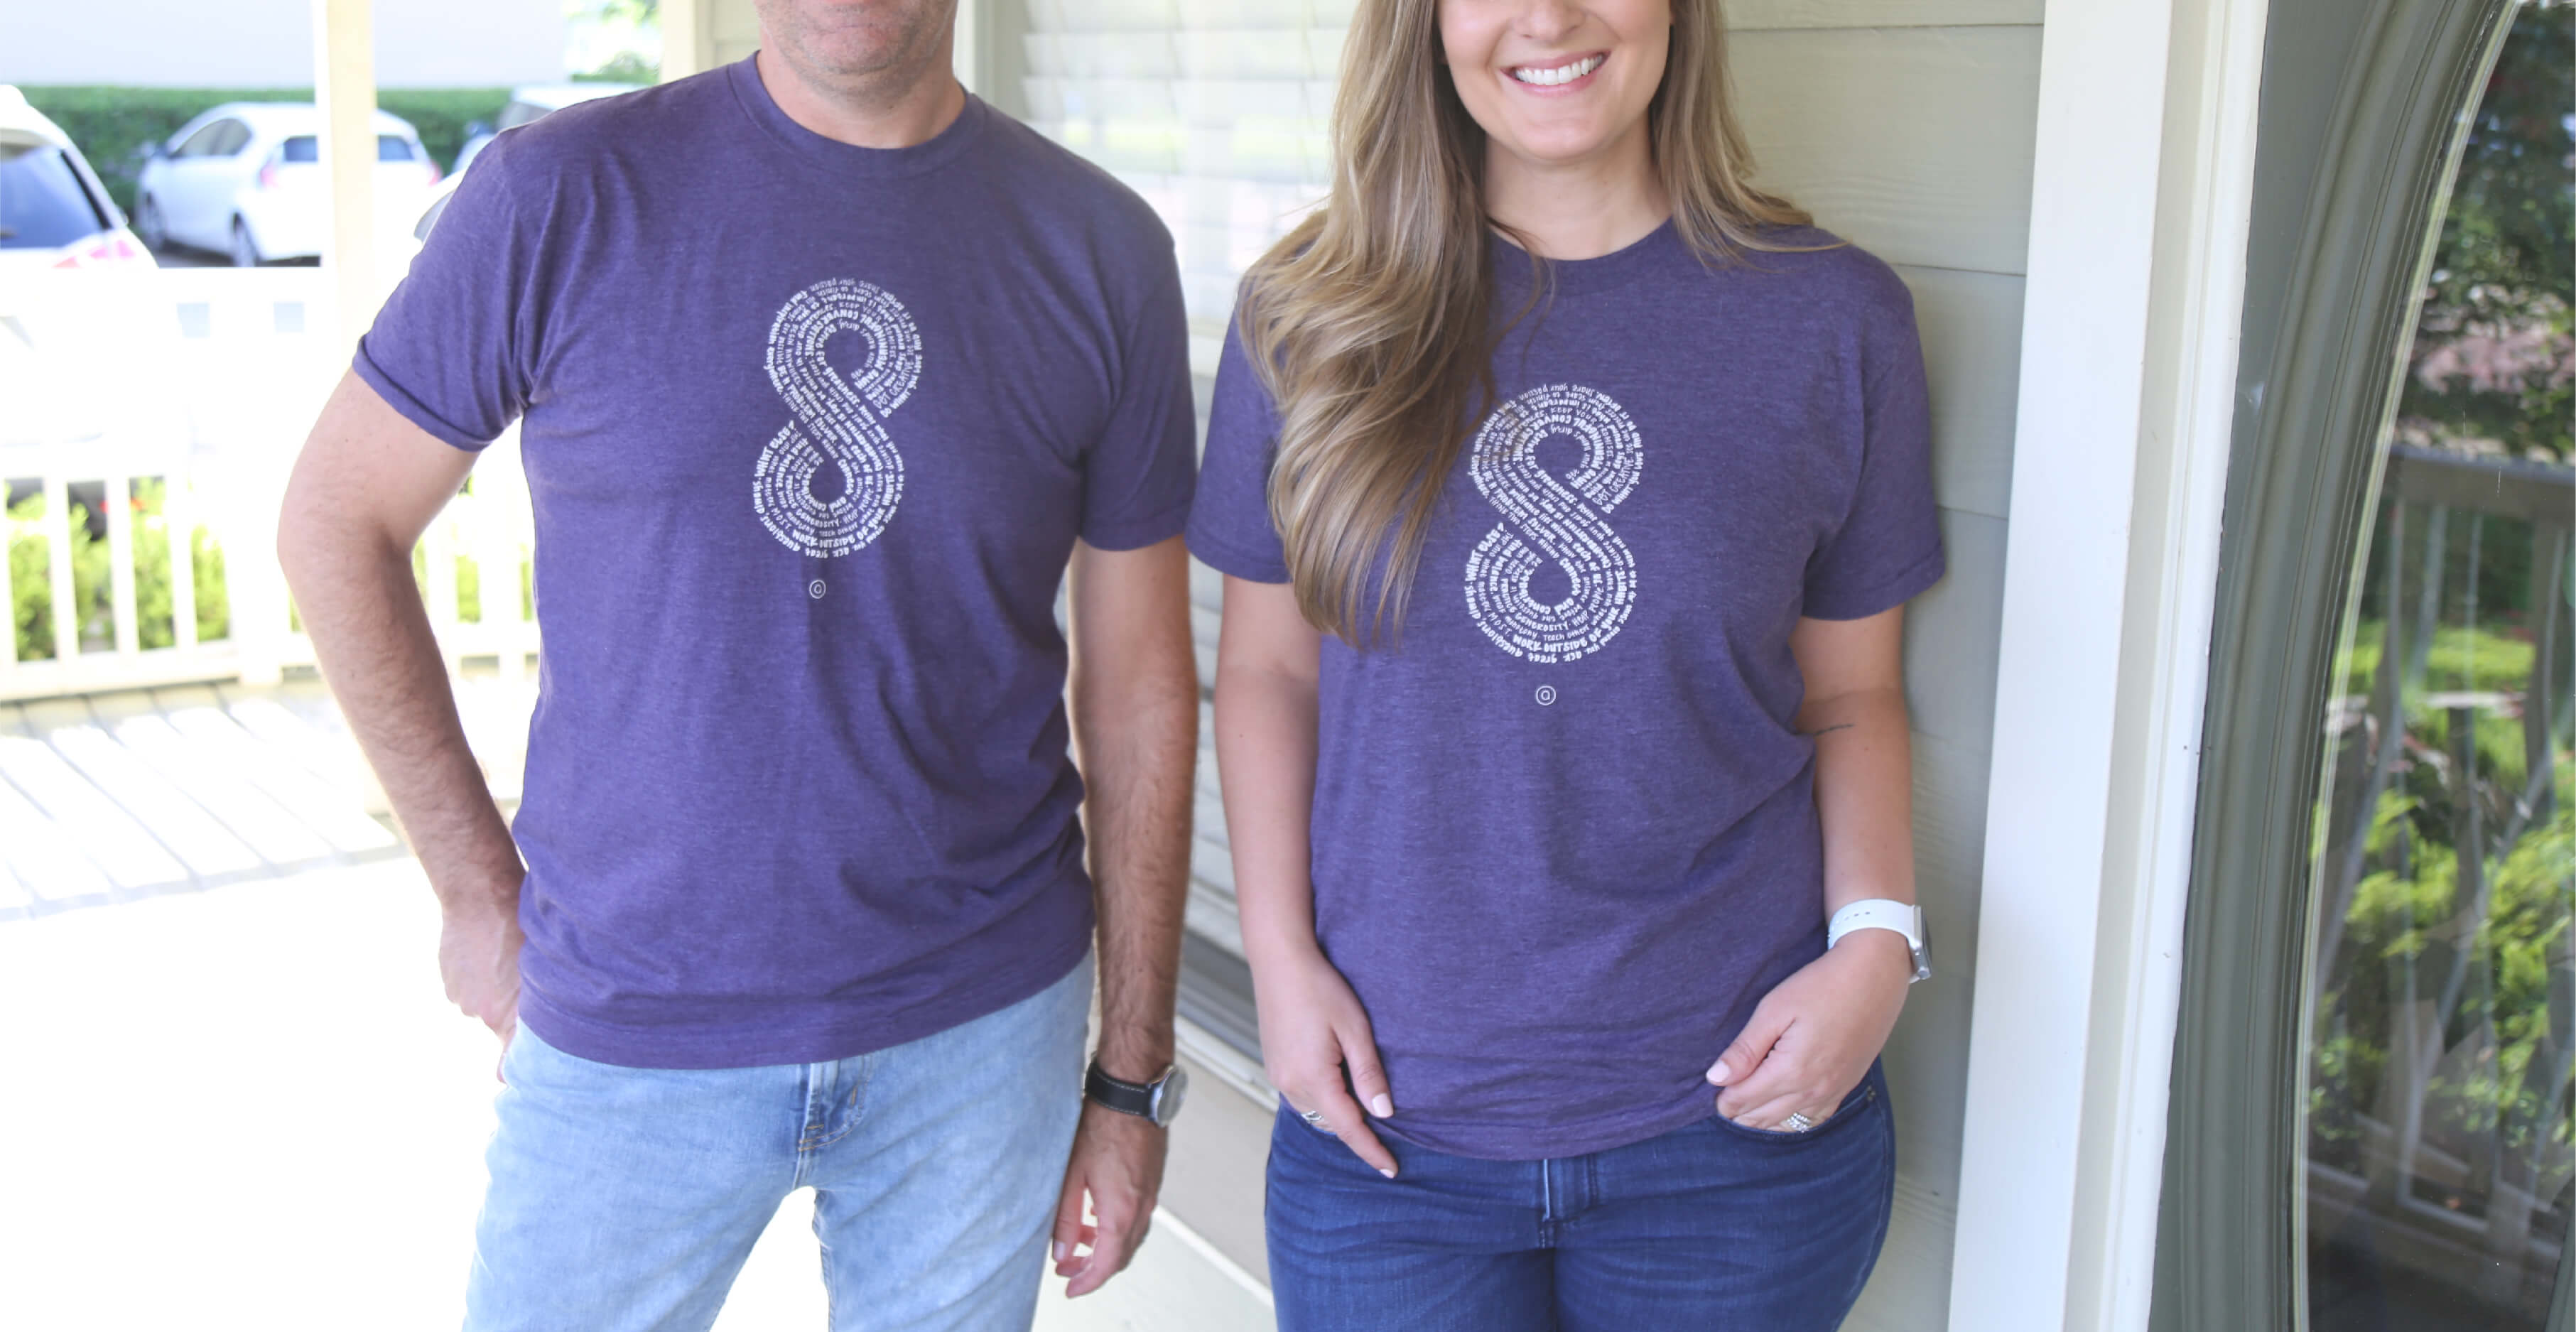 Close up of both a male and female Aedieno team member standing on a brightly lit front porch wearing purple Aedieno 8-year anniversary shirts.